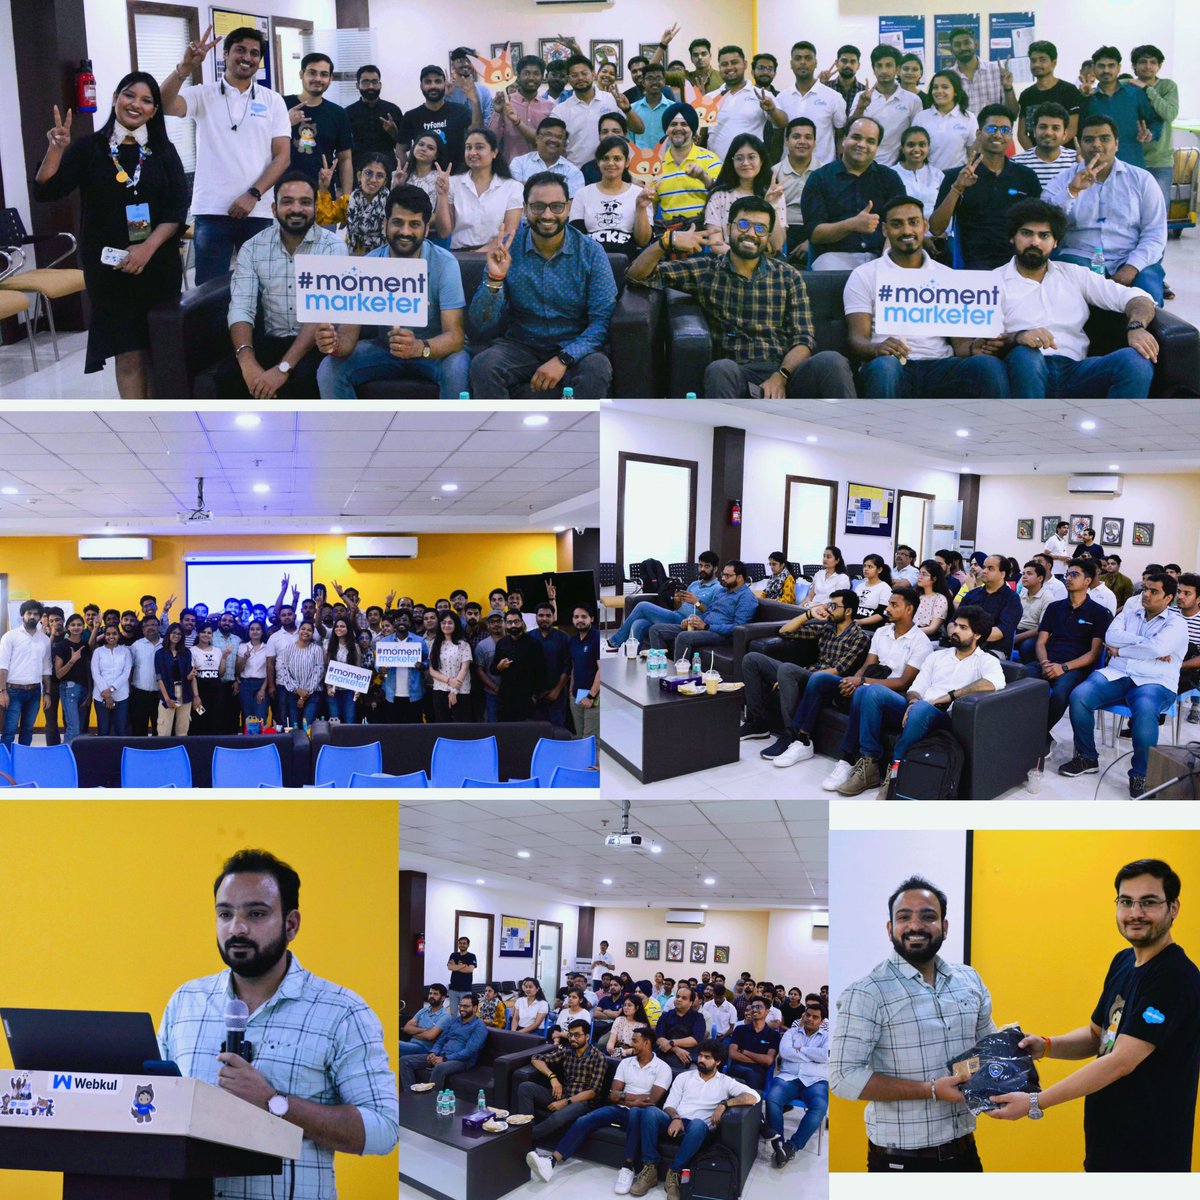 Thank you so much for the lovely #SalesforceSaturday event by @SFNPGhaziabad & group leaders @anant_maks @gauravkala07, 
@SFNoidaNPGroup
@justajeetsingh

I would love to be surrounded by such hardworking people @TrailblazerEsha @tarungupta051 @jasvicky1 @SunnyPatwa98 @abhinavm65